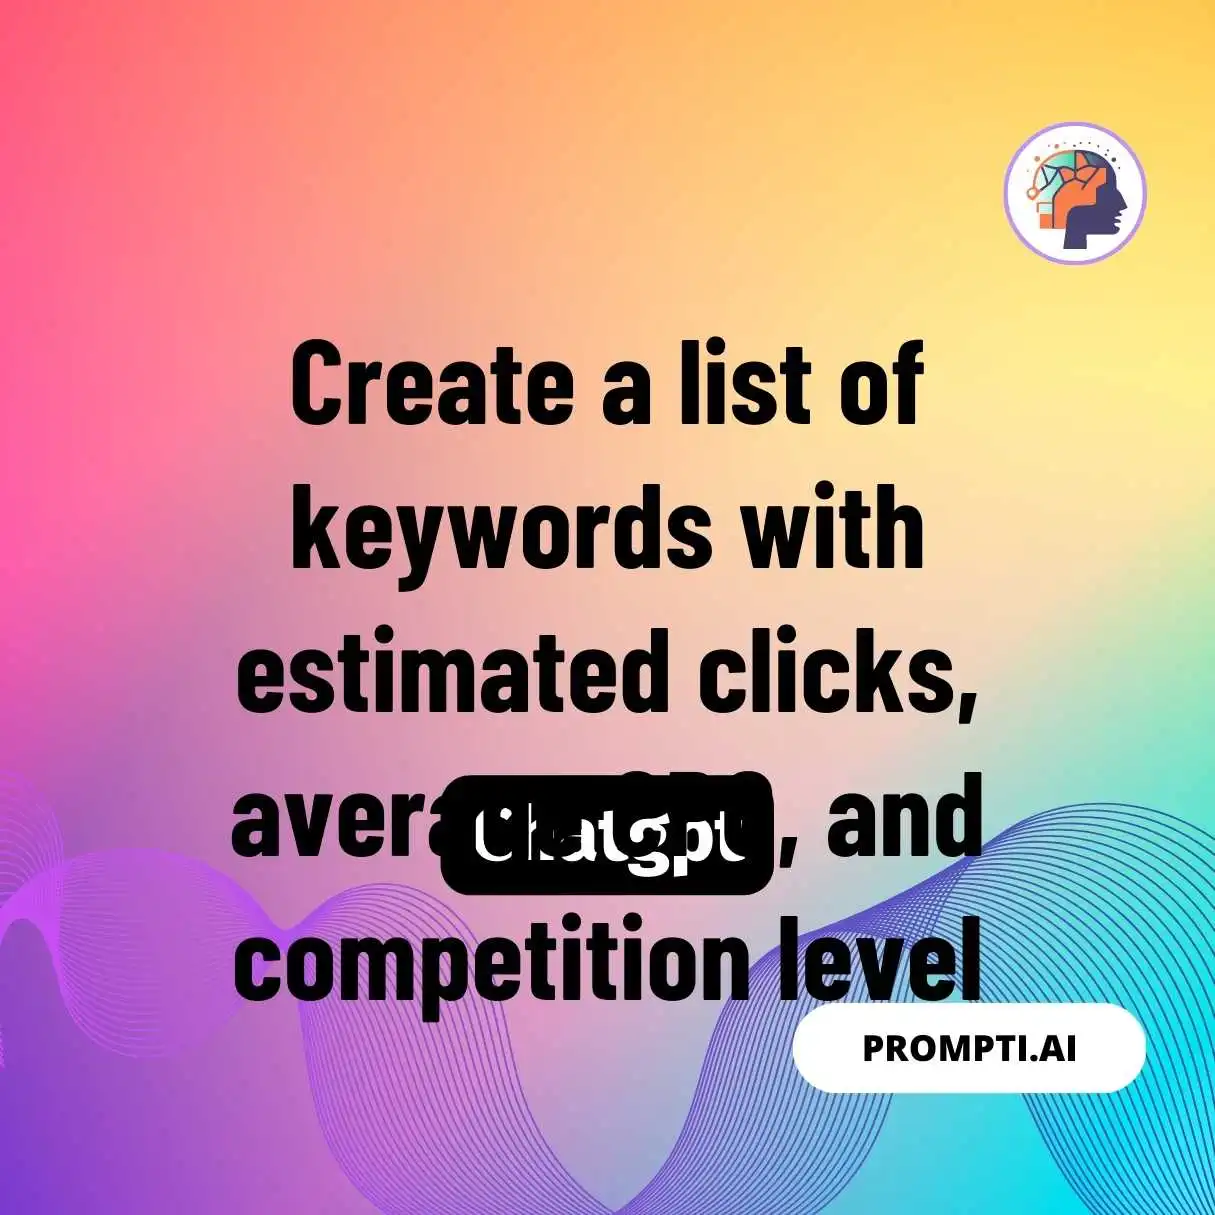 Create a list of keywords with estimated clicks, average CPC, and competition level